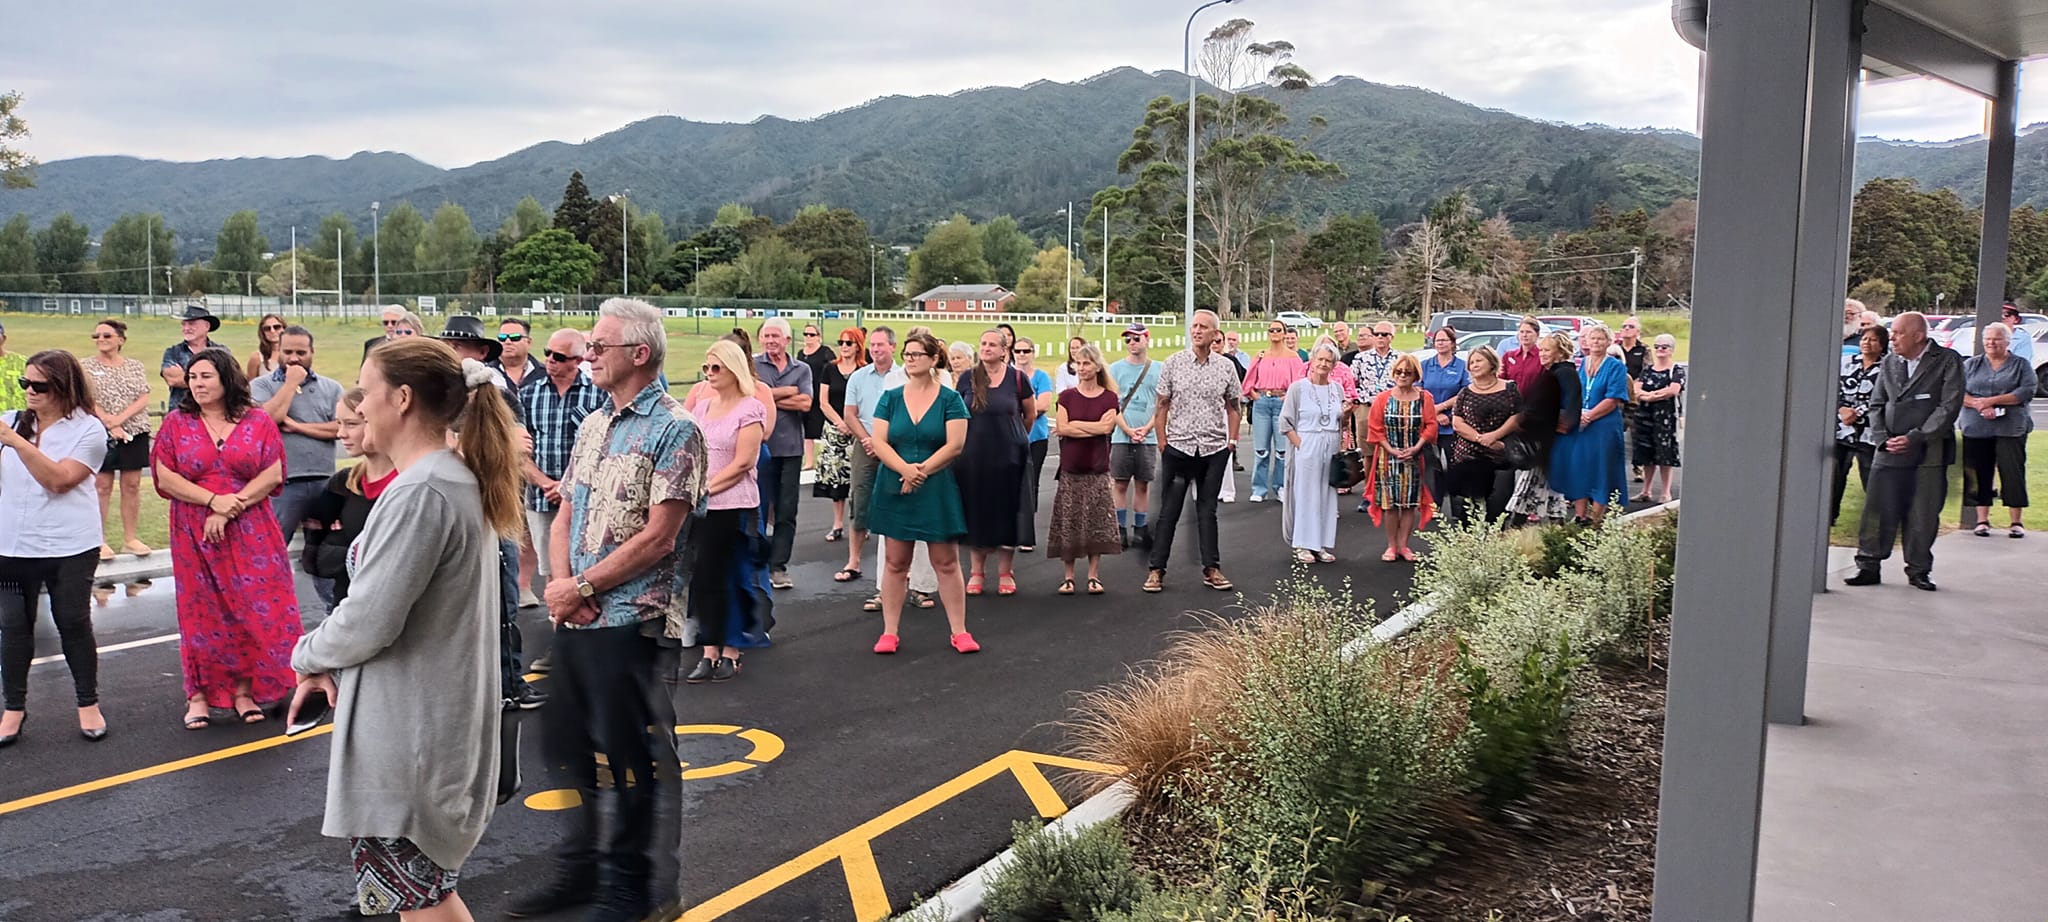 Crowd of attendees at the opening of Coromandel Independent Living Trust's Te Puutahi - The Hub